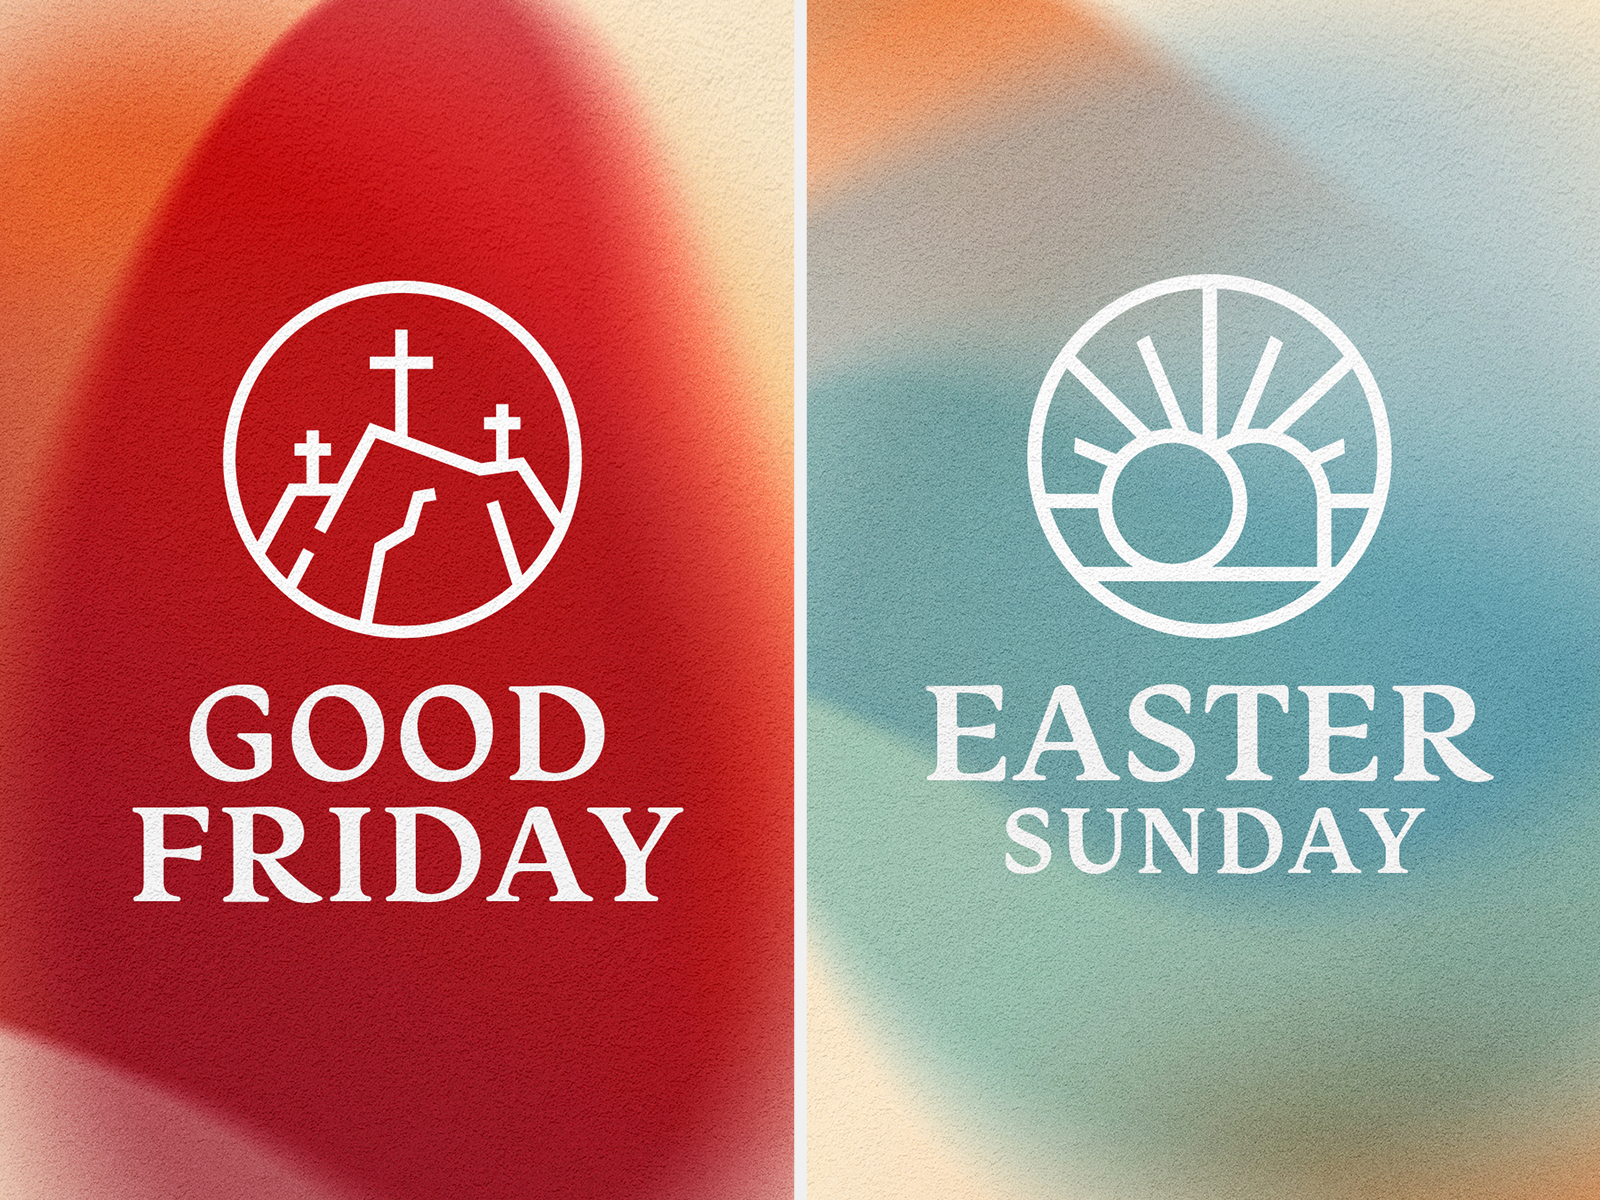 Good Friday Easter Sunday by Jake Givens on Dribbble